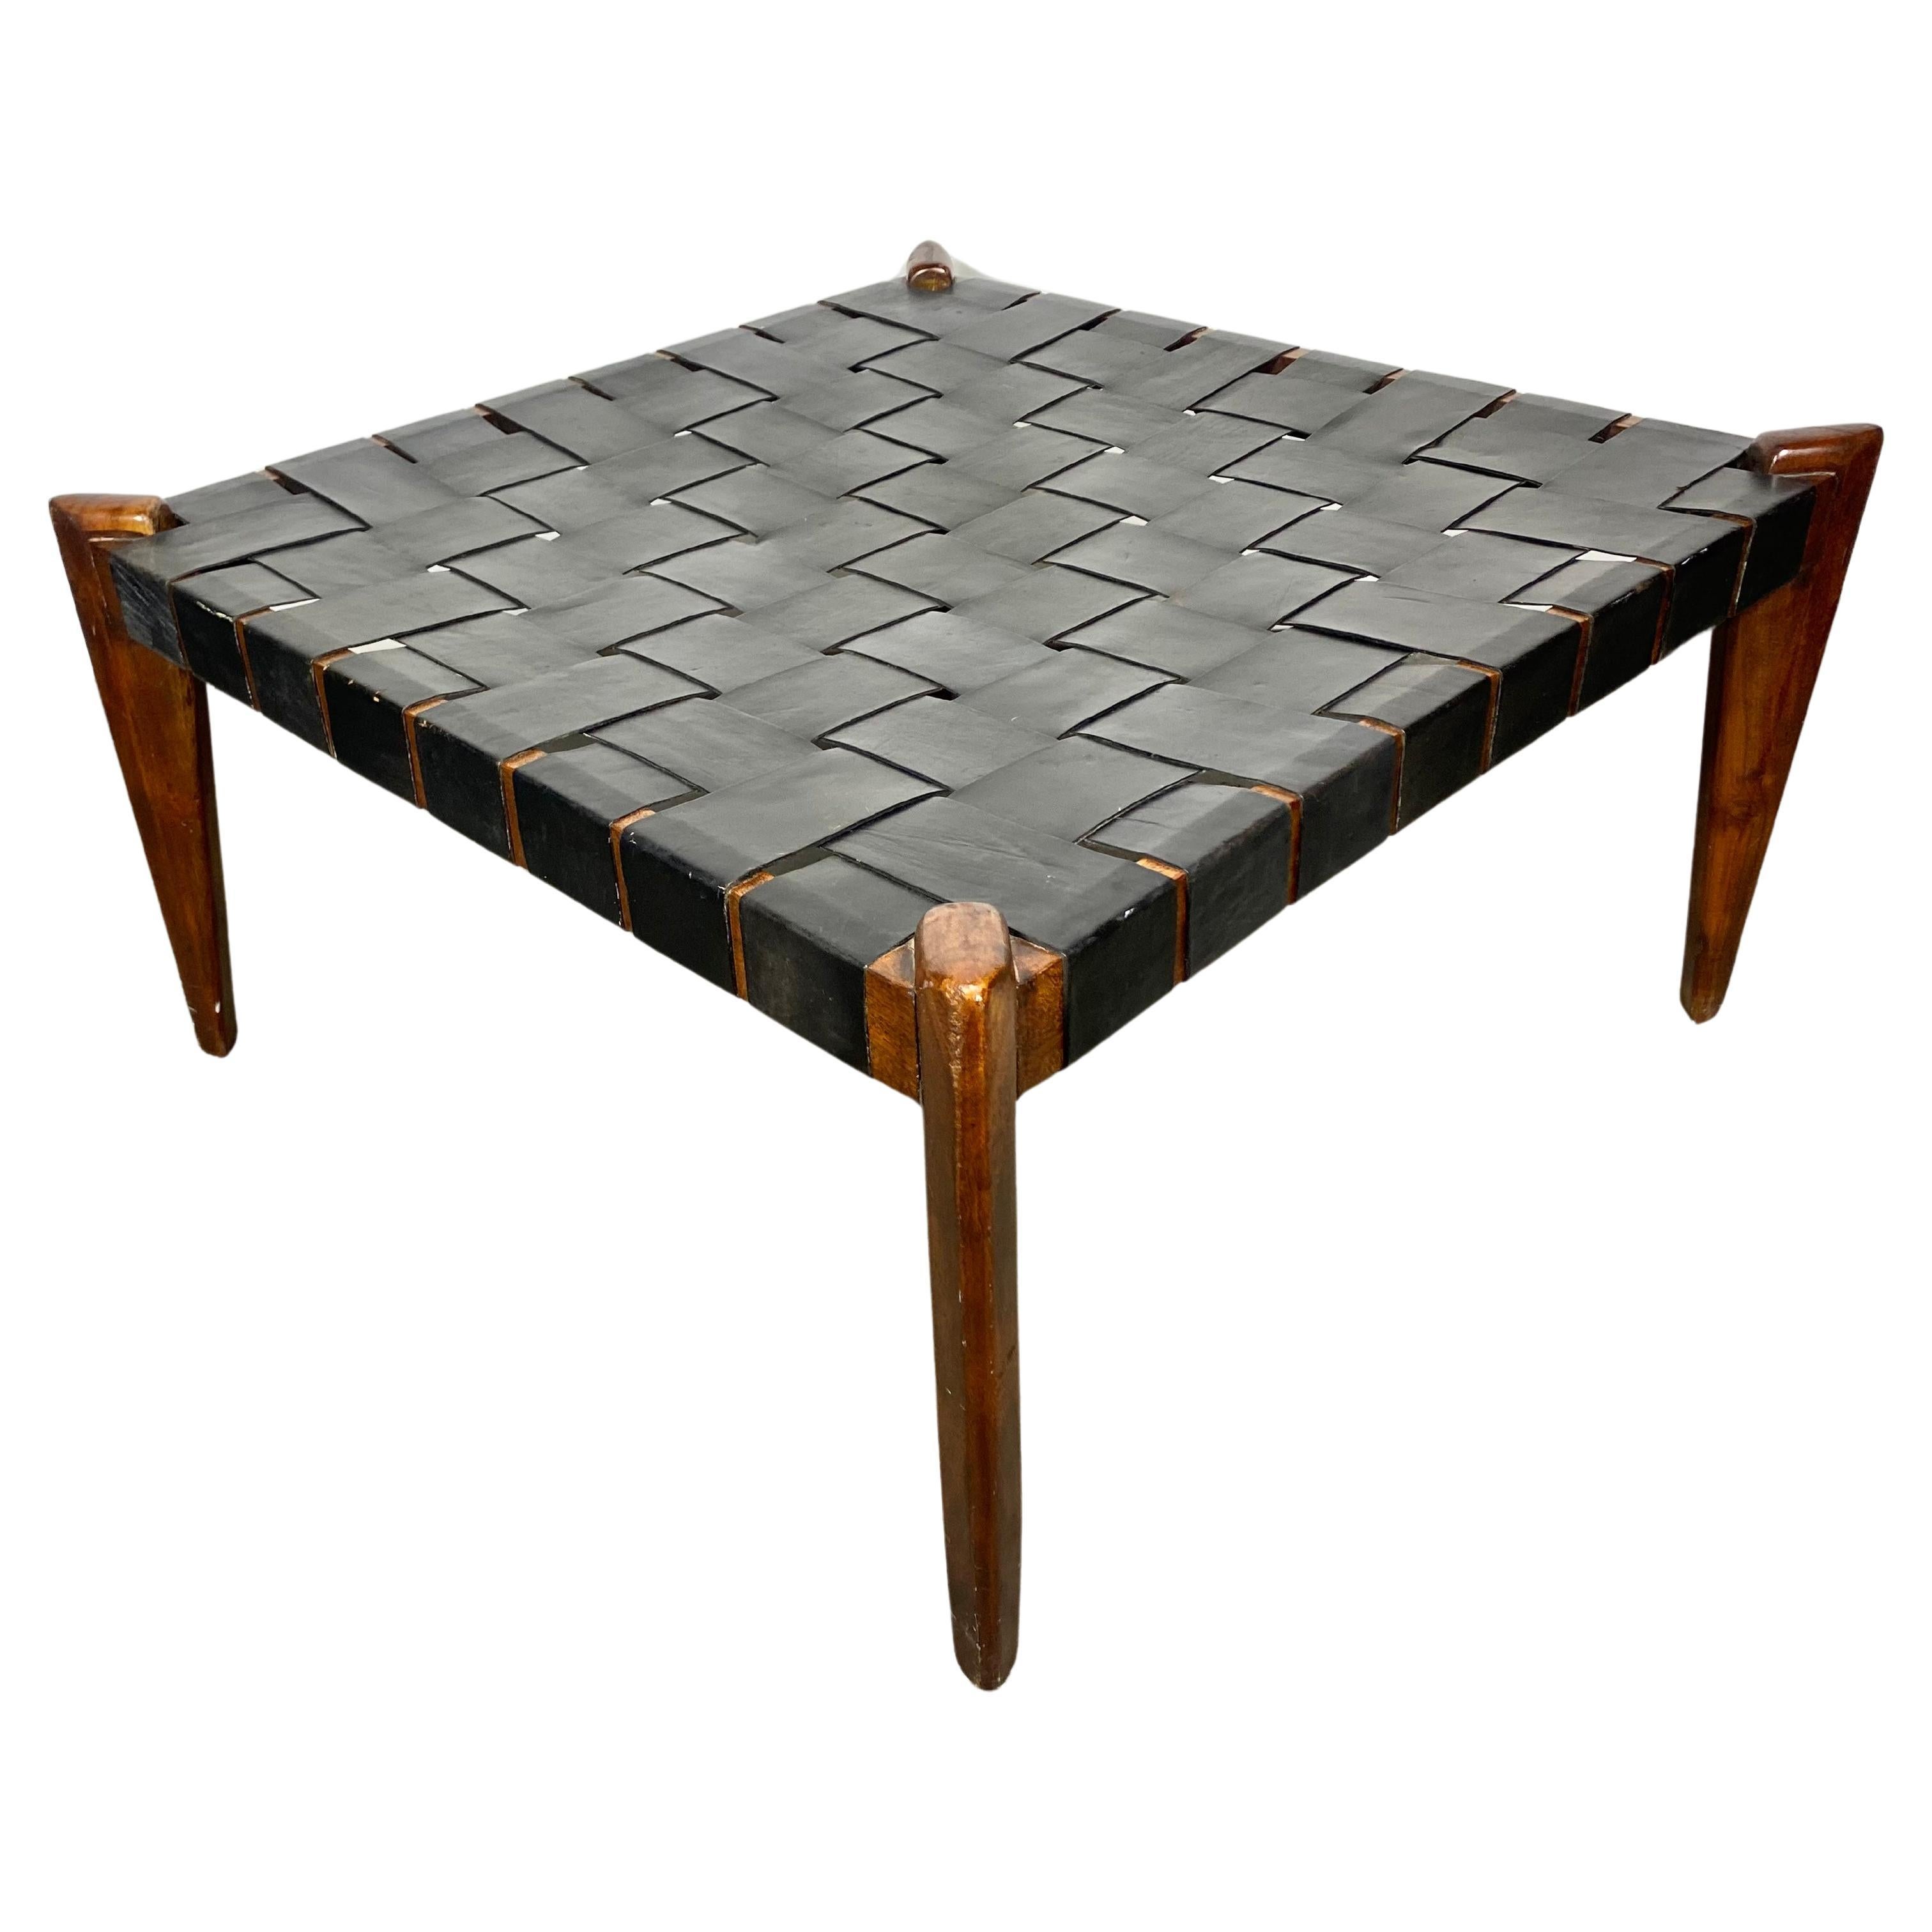  Modernist Woven Leather / Rosewood  Table , Ottoman  by Edmond Spence For Sale